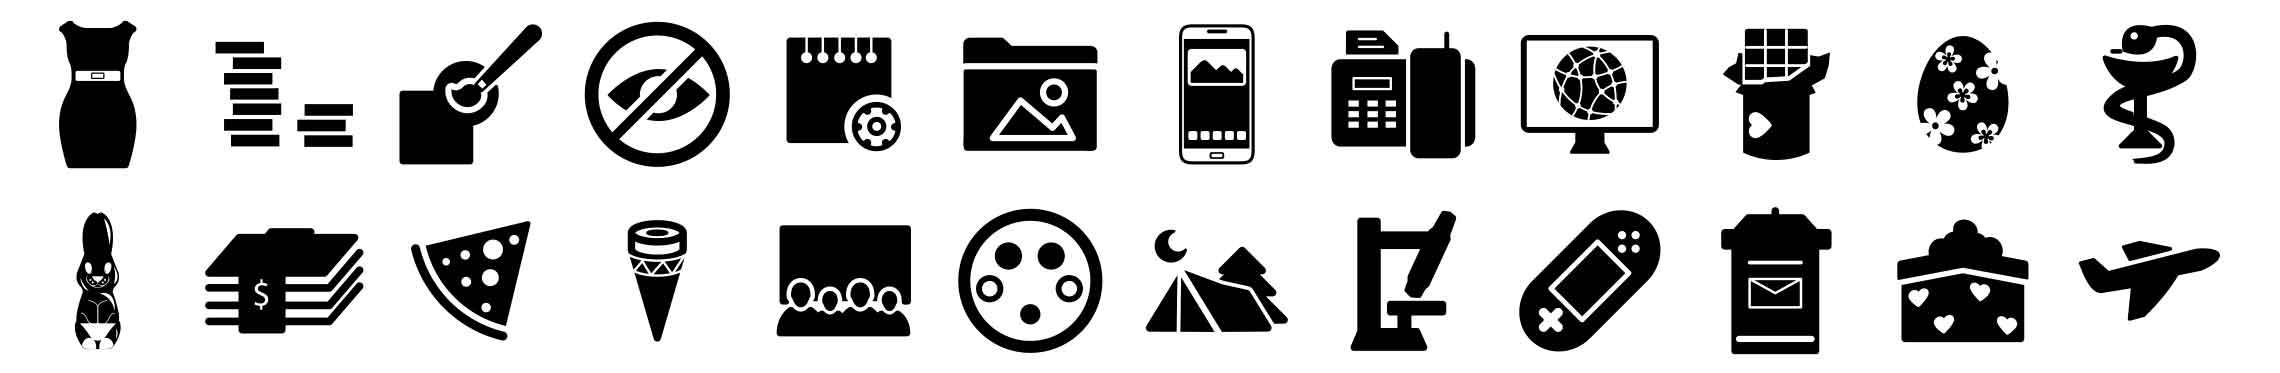 glyph icons pack